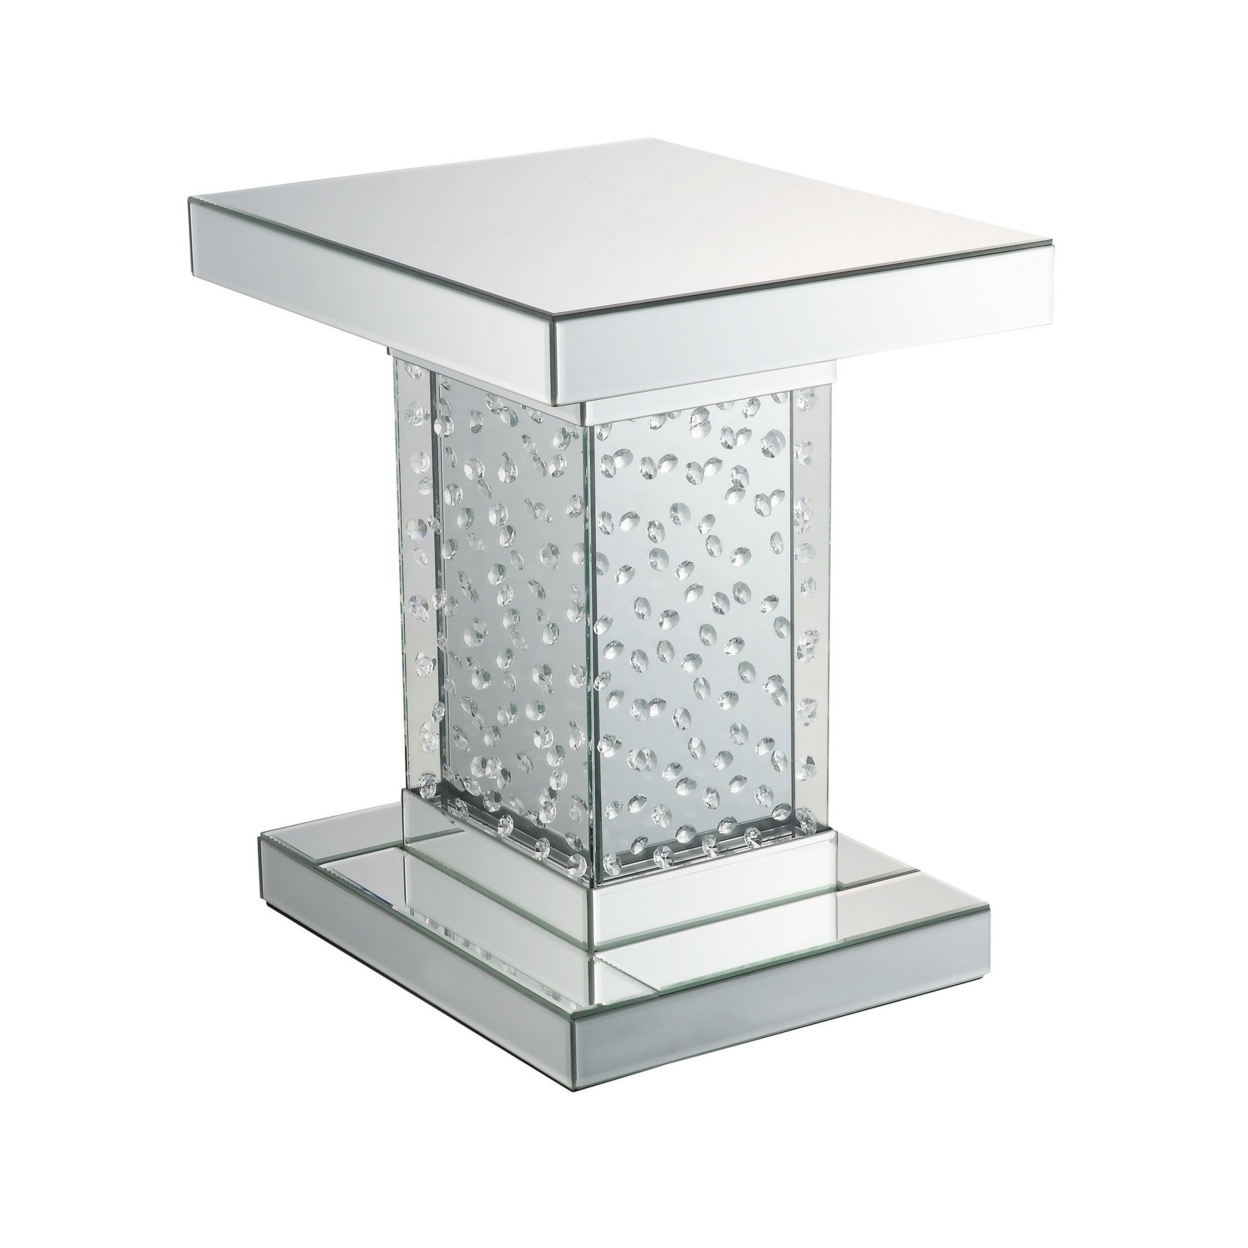 Pali 20 Inch Square Pedestal End Table, Mirrored, Faux Crystal Inlay, Silver- Saltoro Sherpi